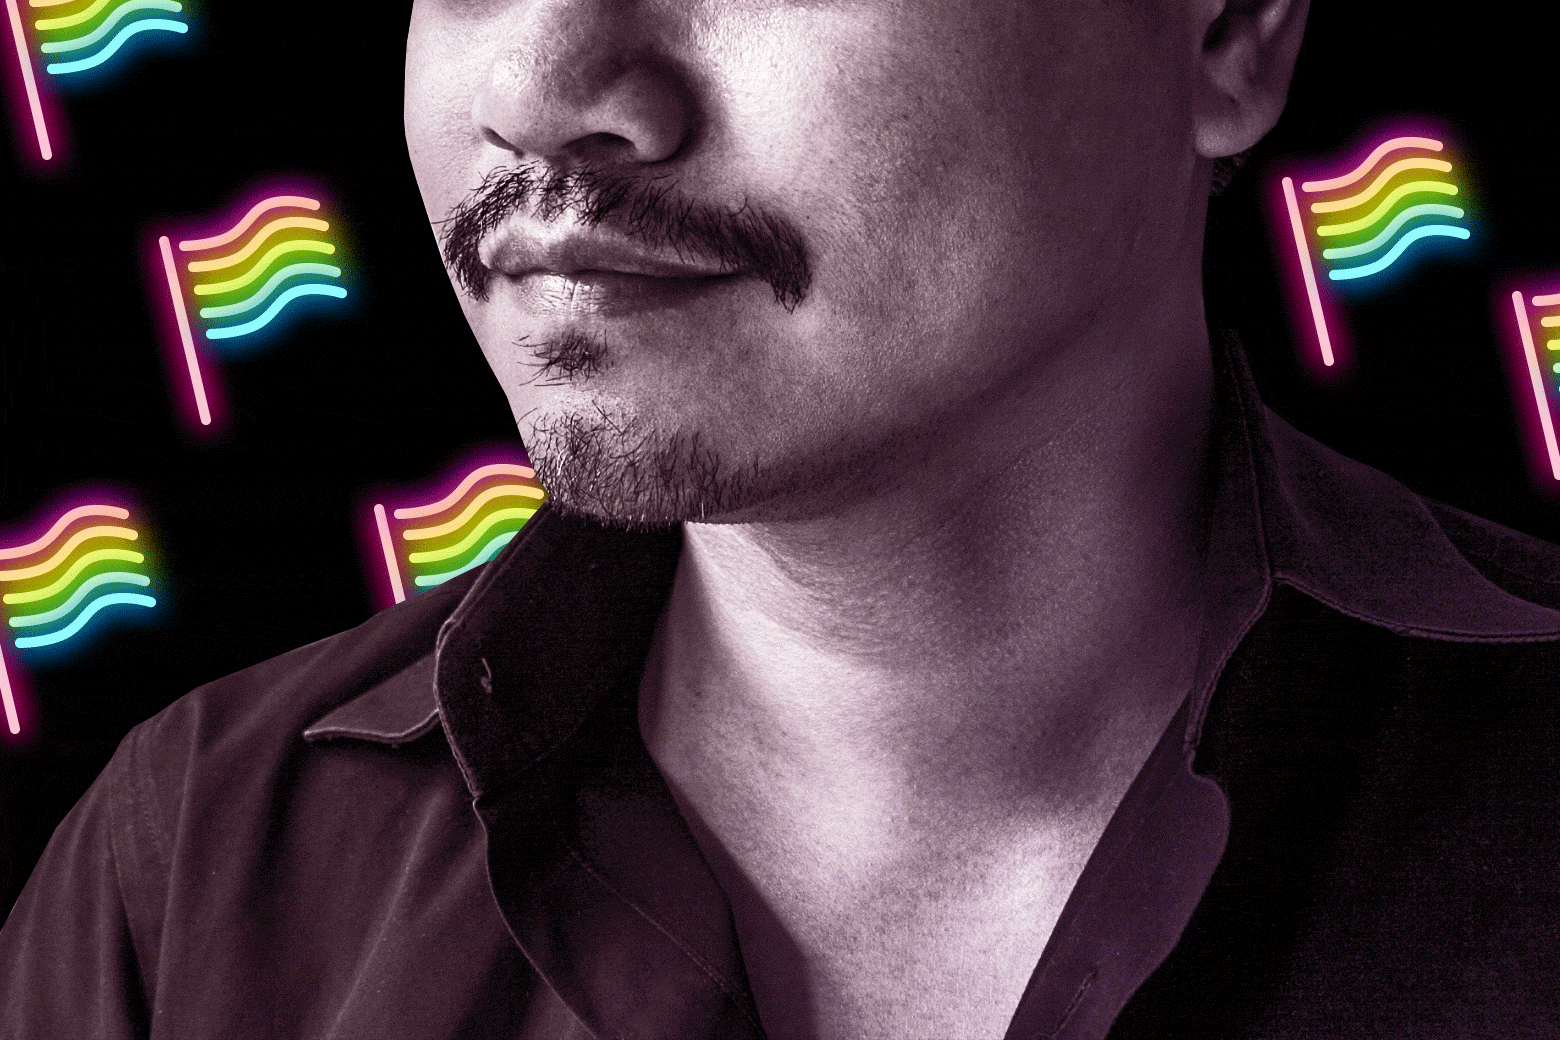 Photo illustration of a mustachioed man in his 40s in front of some neon rainbow flags.